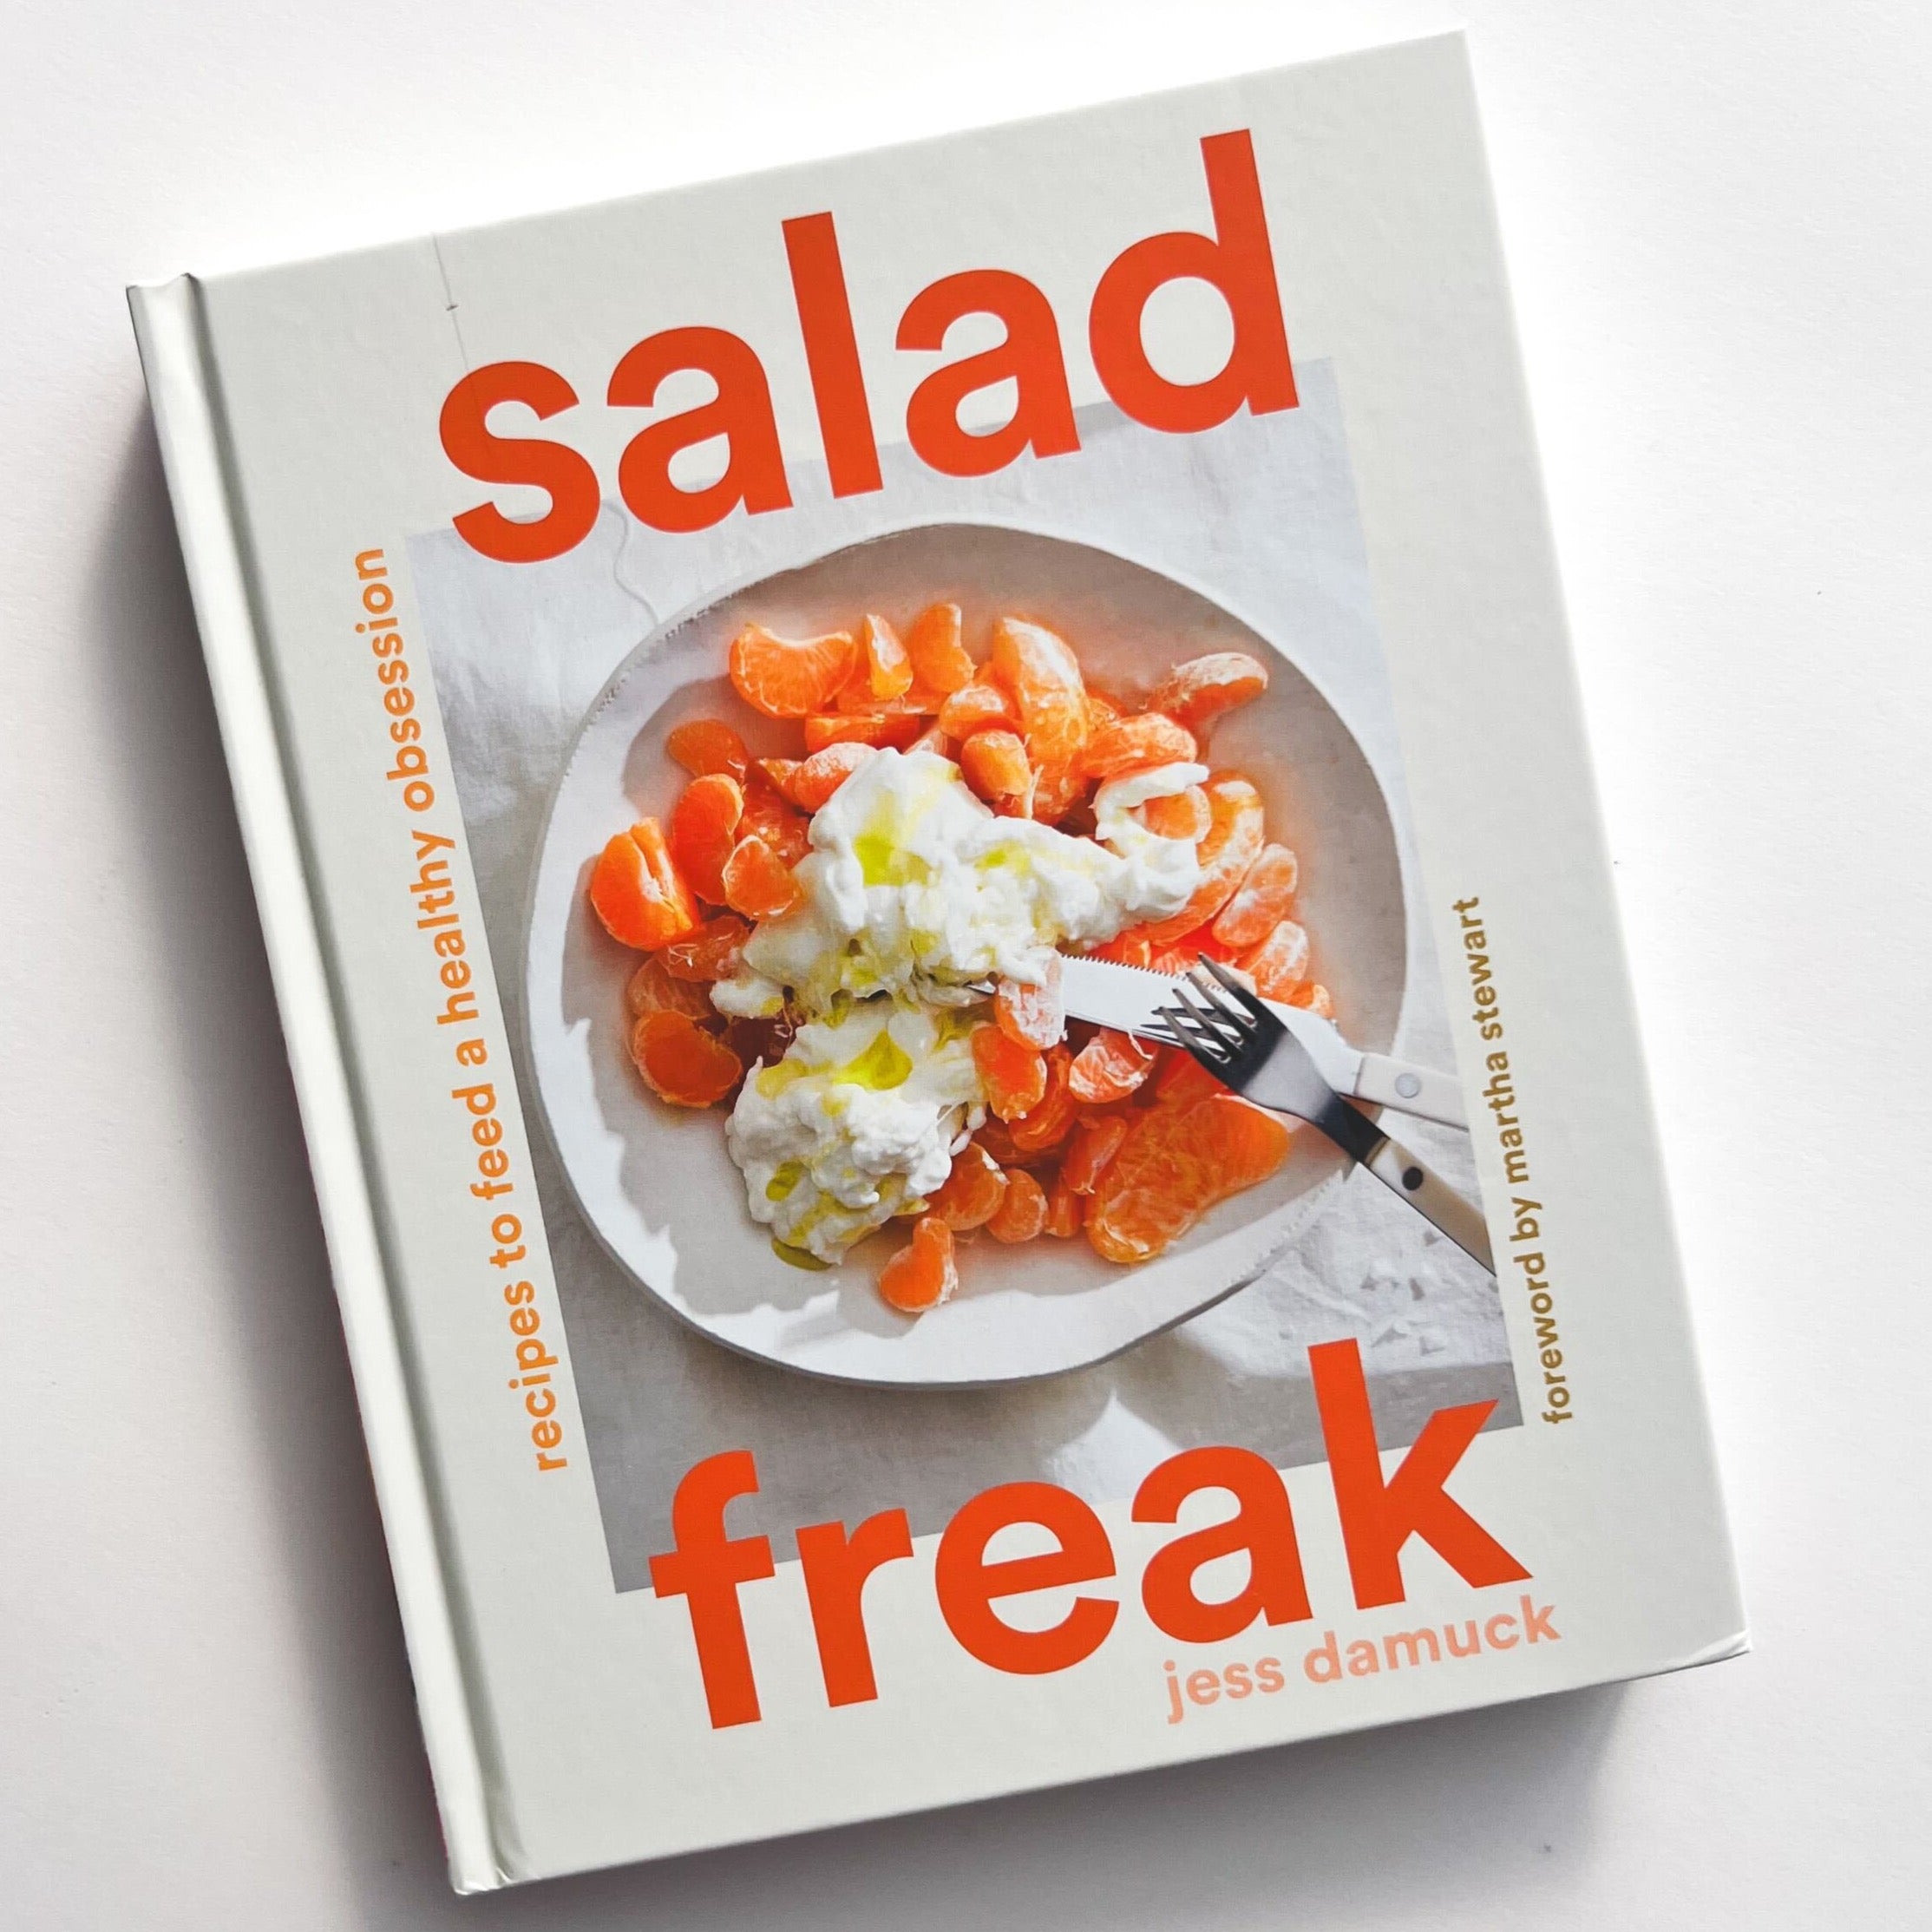 SALAD FREAK book cover with picture of burrata and tangerines